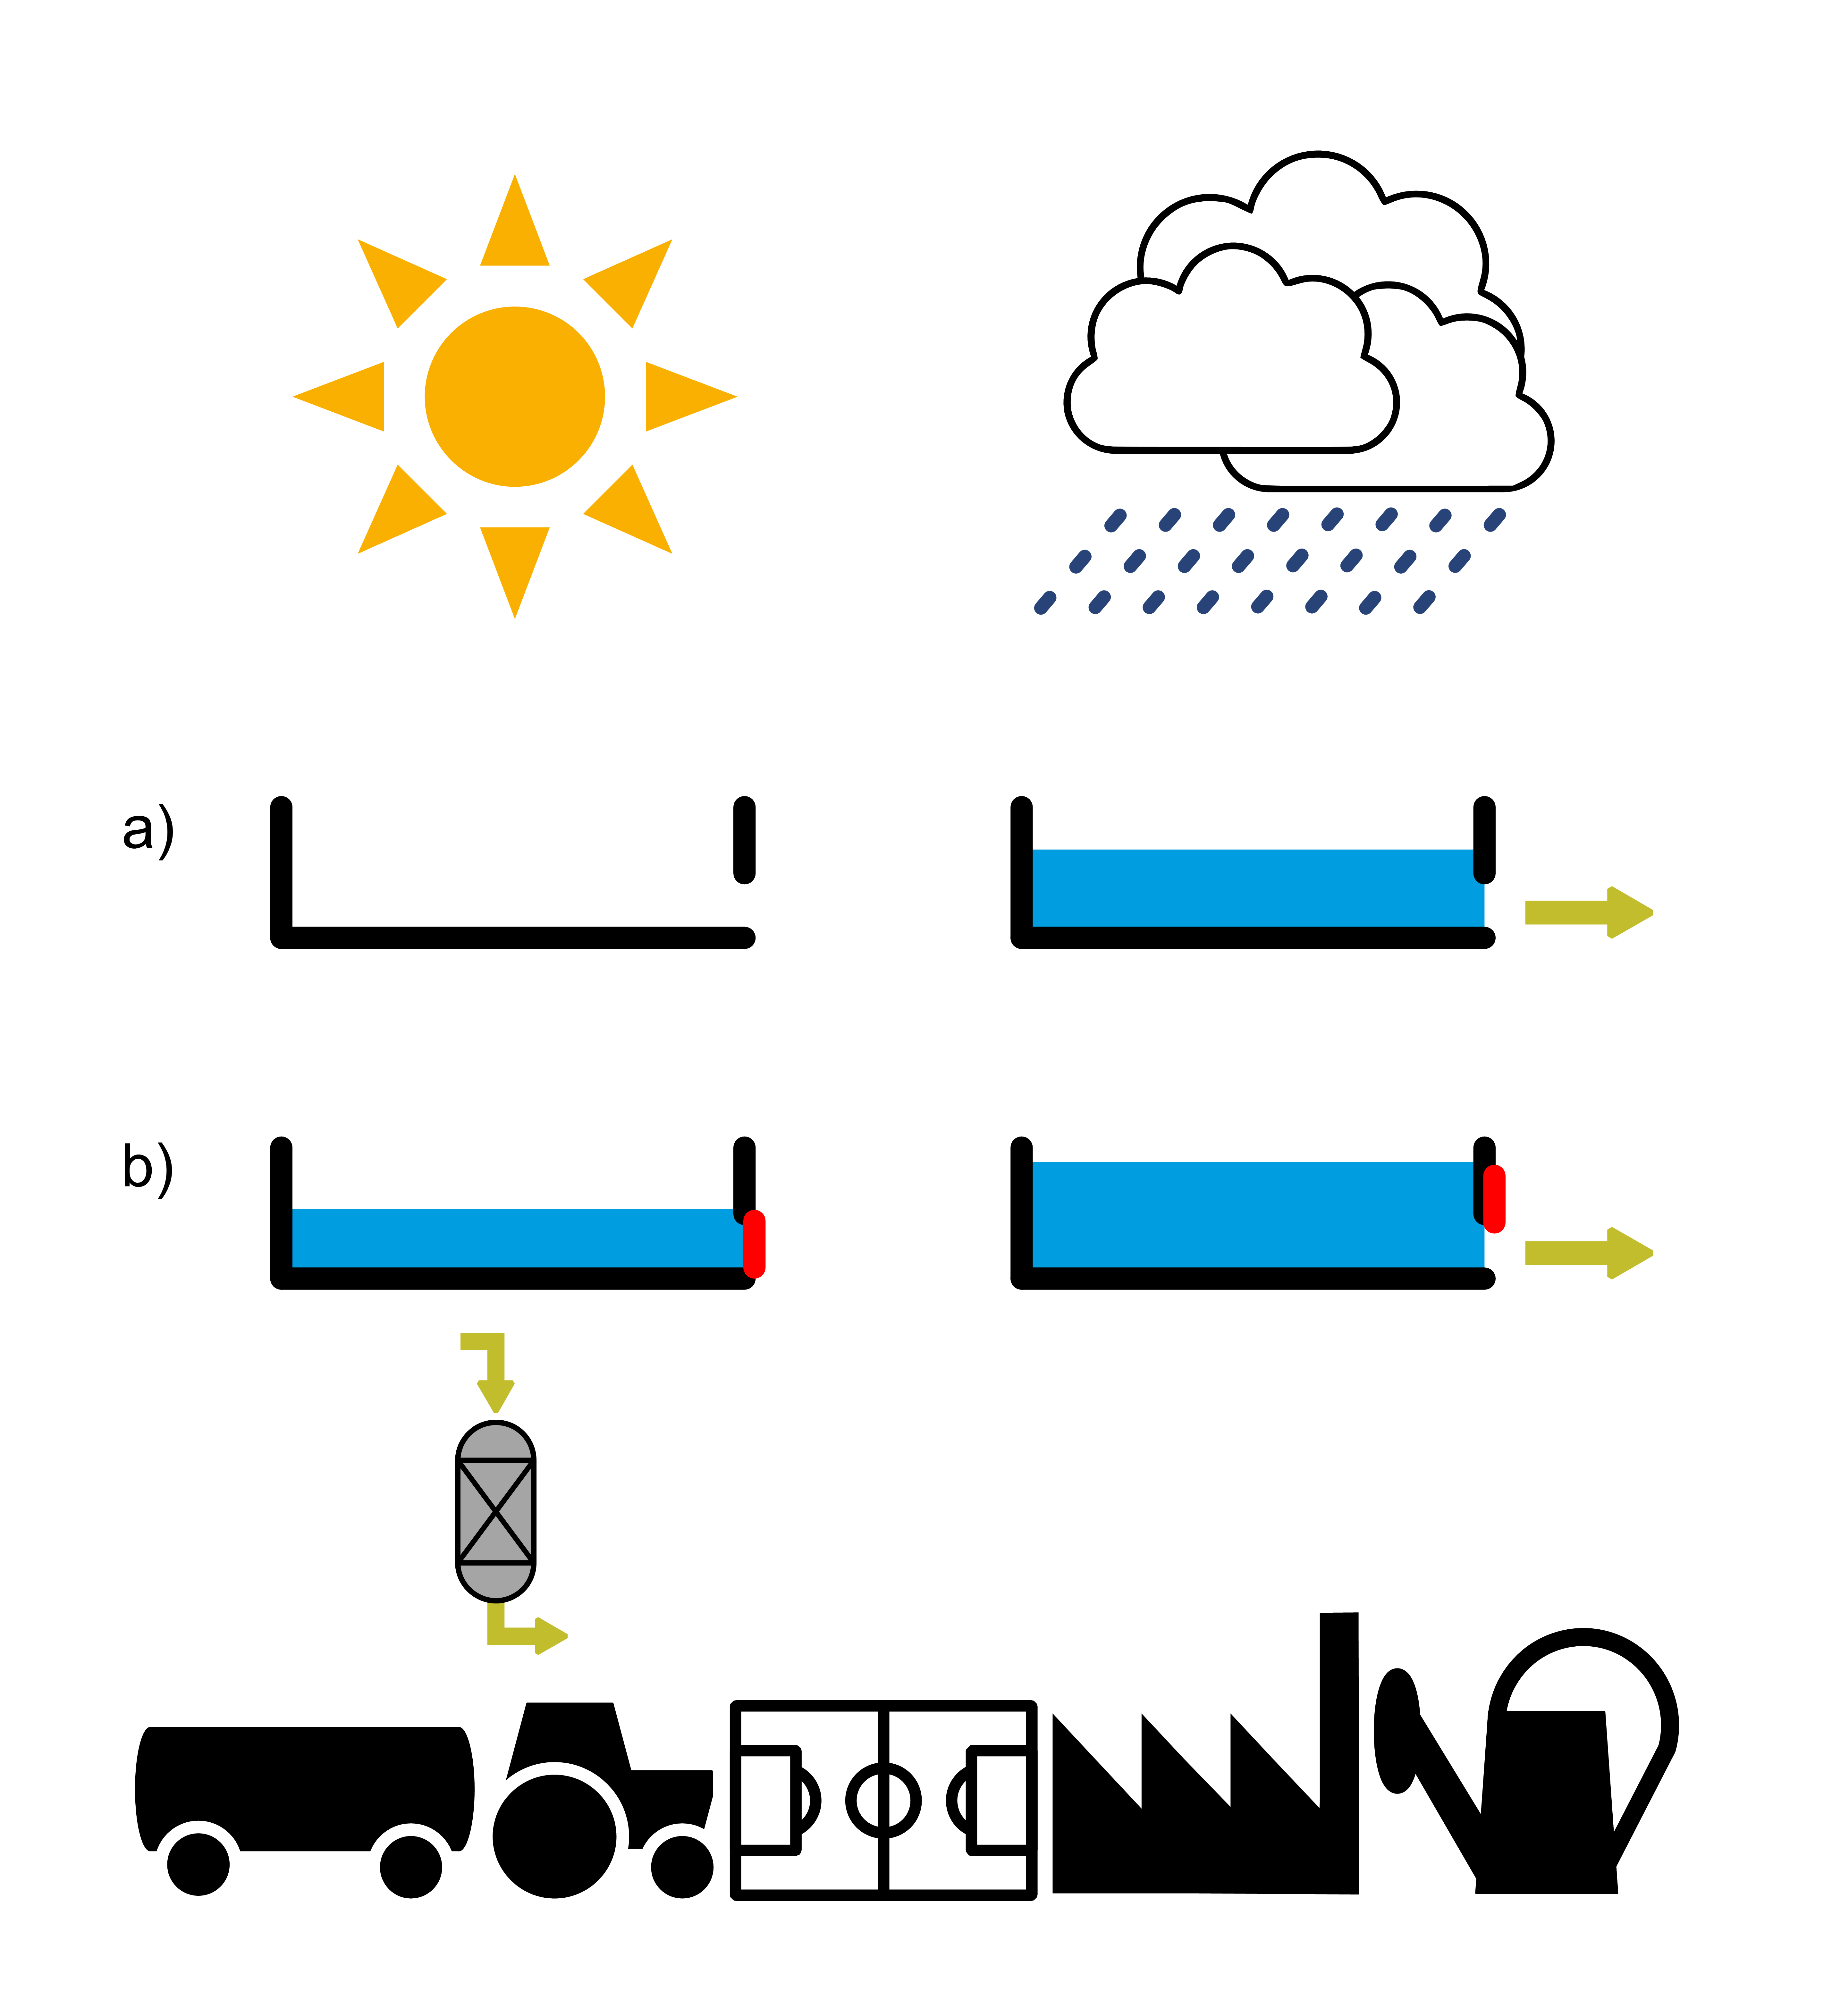 Image of Stormwater reuse system for agriculture